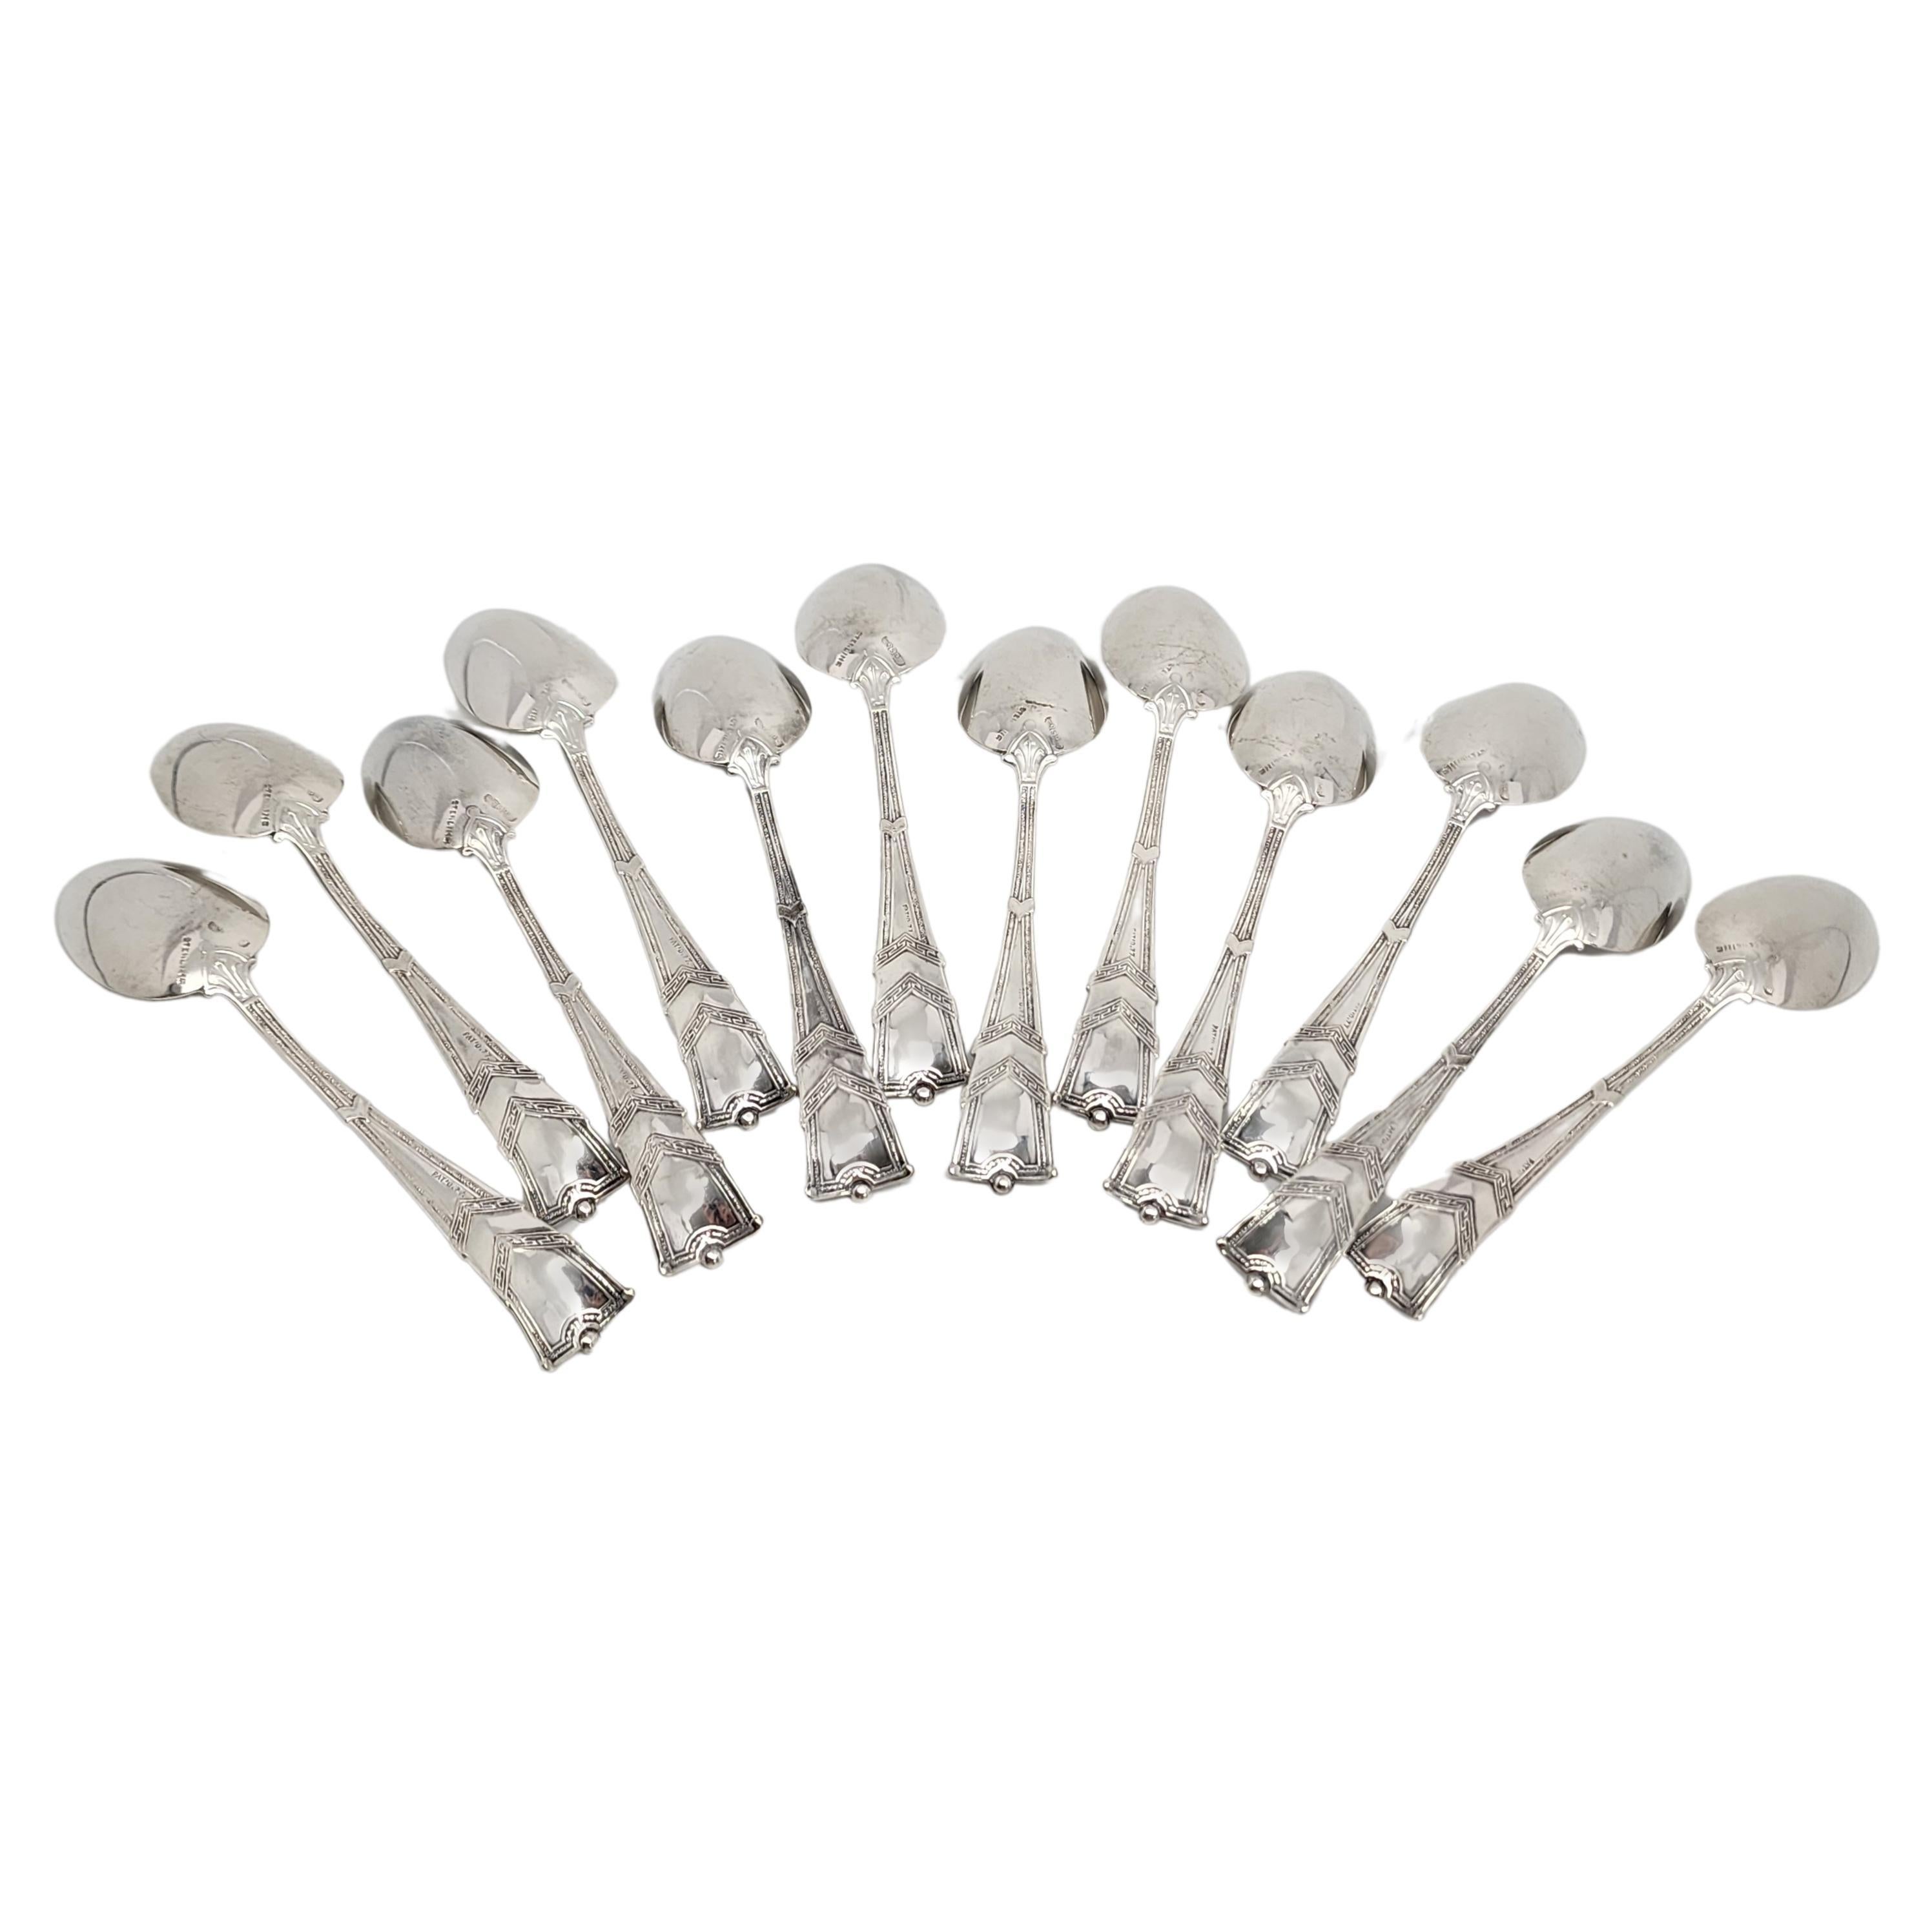 Set of 12 antique sterling silver teaspoons by George Shiebler in the Amaryllis pattern, with monogram, circa 1877.

Monogram appears to be JEM

Designed in 1877, the Amaryllis pattern is an intricate and unusual pattern.

Measures approx 5 3/4